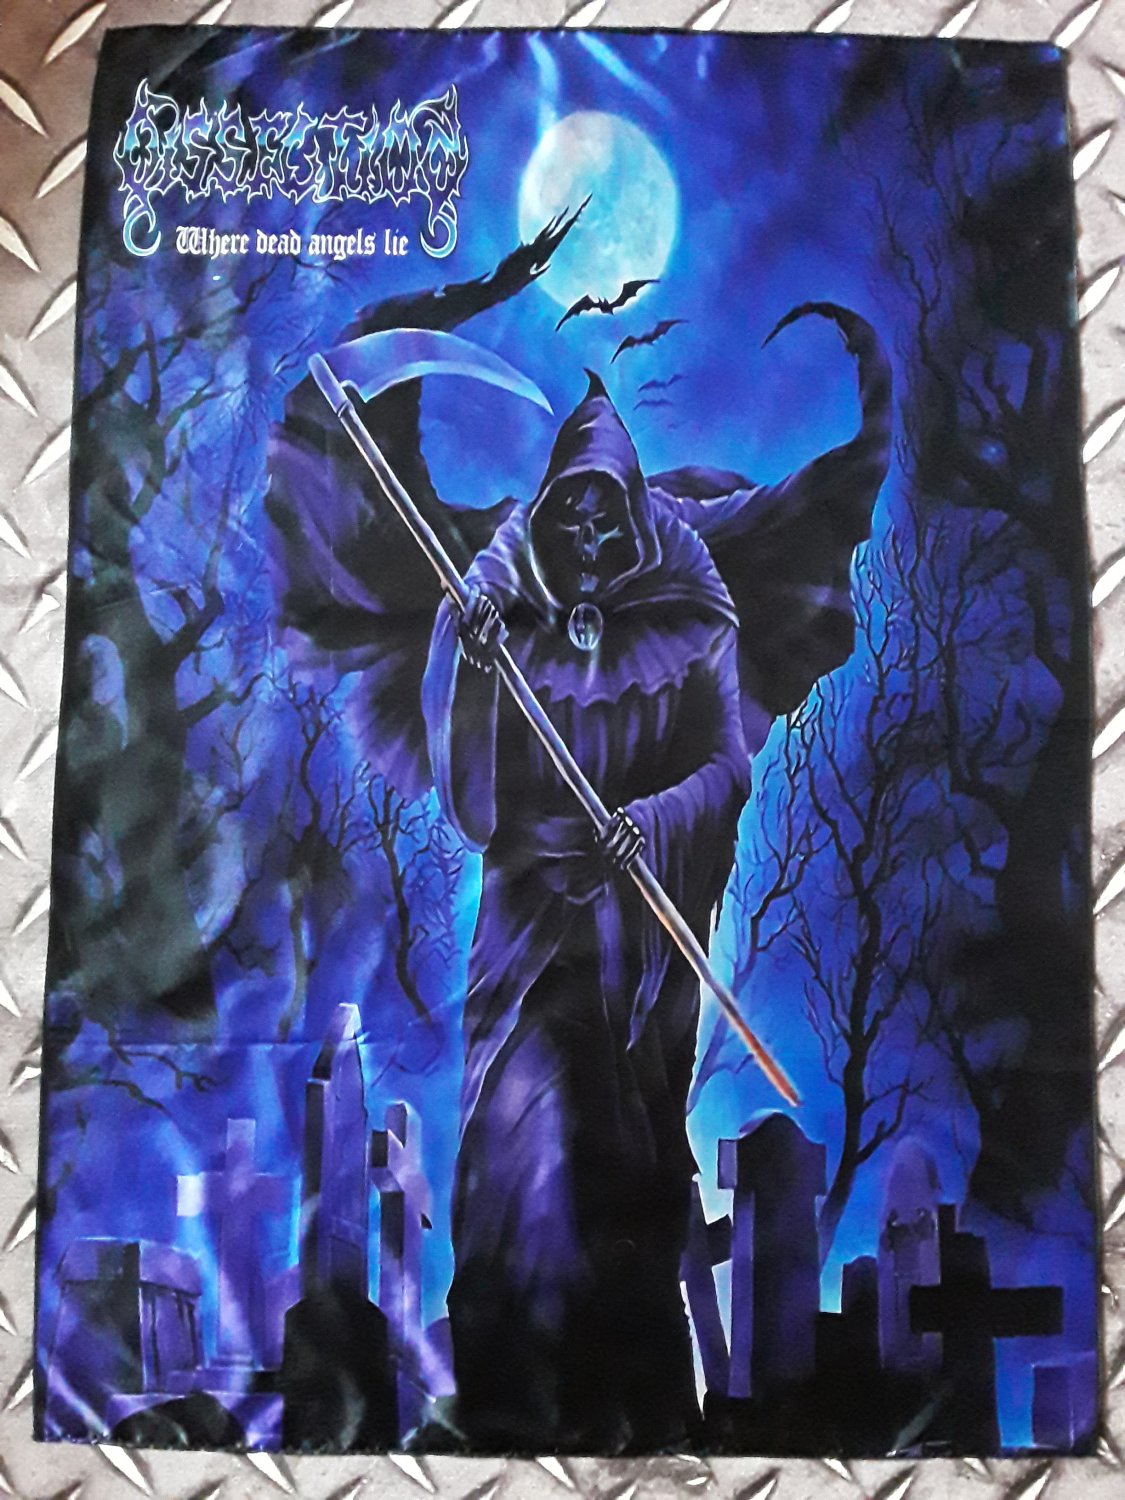 DISSECTION - Where dead angels lie FLAG Poster Banner Melodic Death METAL